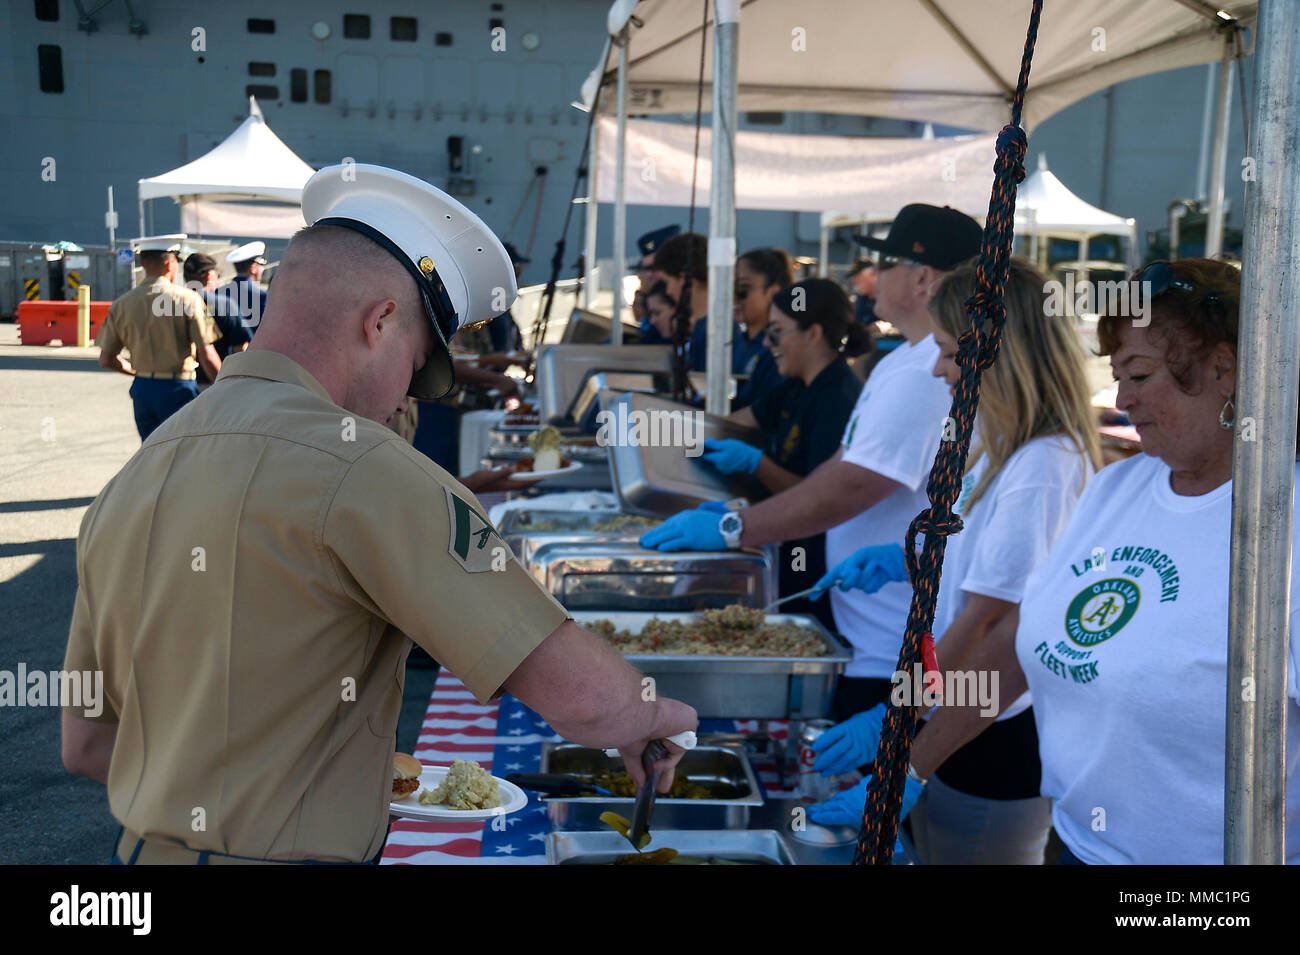 SAN FRANCISCO (Oct. 8, 2017) Volunteers from Oakland Navy League, Oakland Police Department and local civic organizations serve lunch to Sailors, Marines and Coast Guardsmen as part of Fleet Week San Francisco 2017. Fleet week provides an opportunity for the American public to meet their Navy, Marine Corps, and Coast Guard team and to experience America’s sea services. Fleet Week San Francisco will highlight naval personnel, equipment, technology, and capabilities, with an emphasis on humanitarian assistance and disaster response. (U.S. Navy photo by Mass Communication Specialist 1st Class Ant Stock Photo